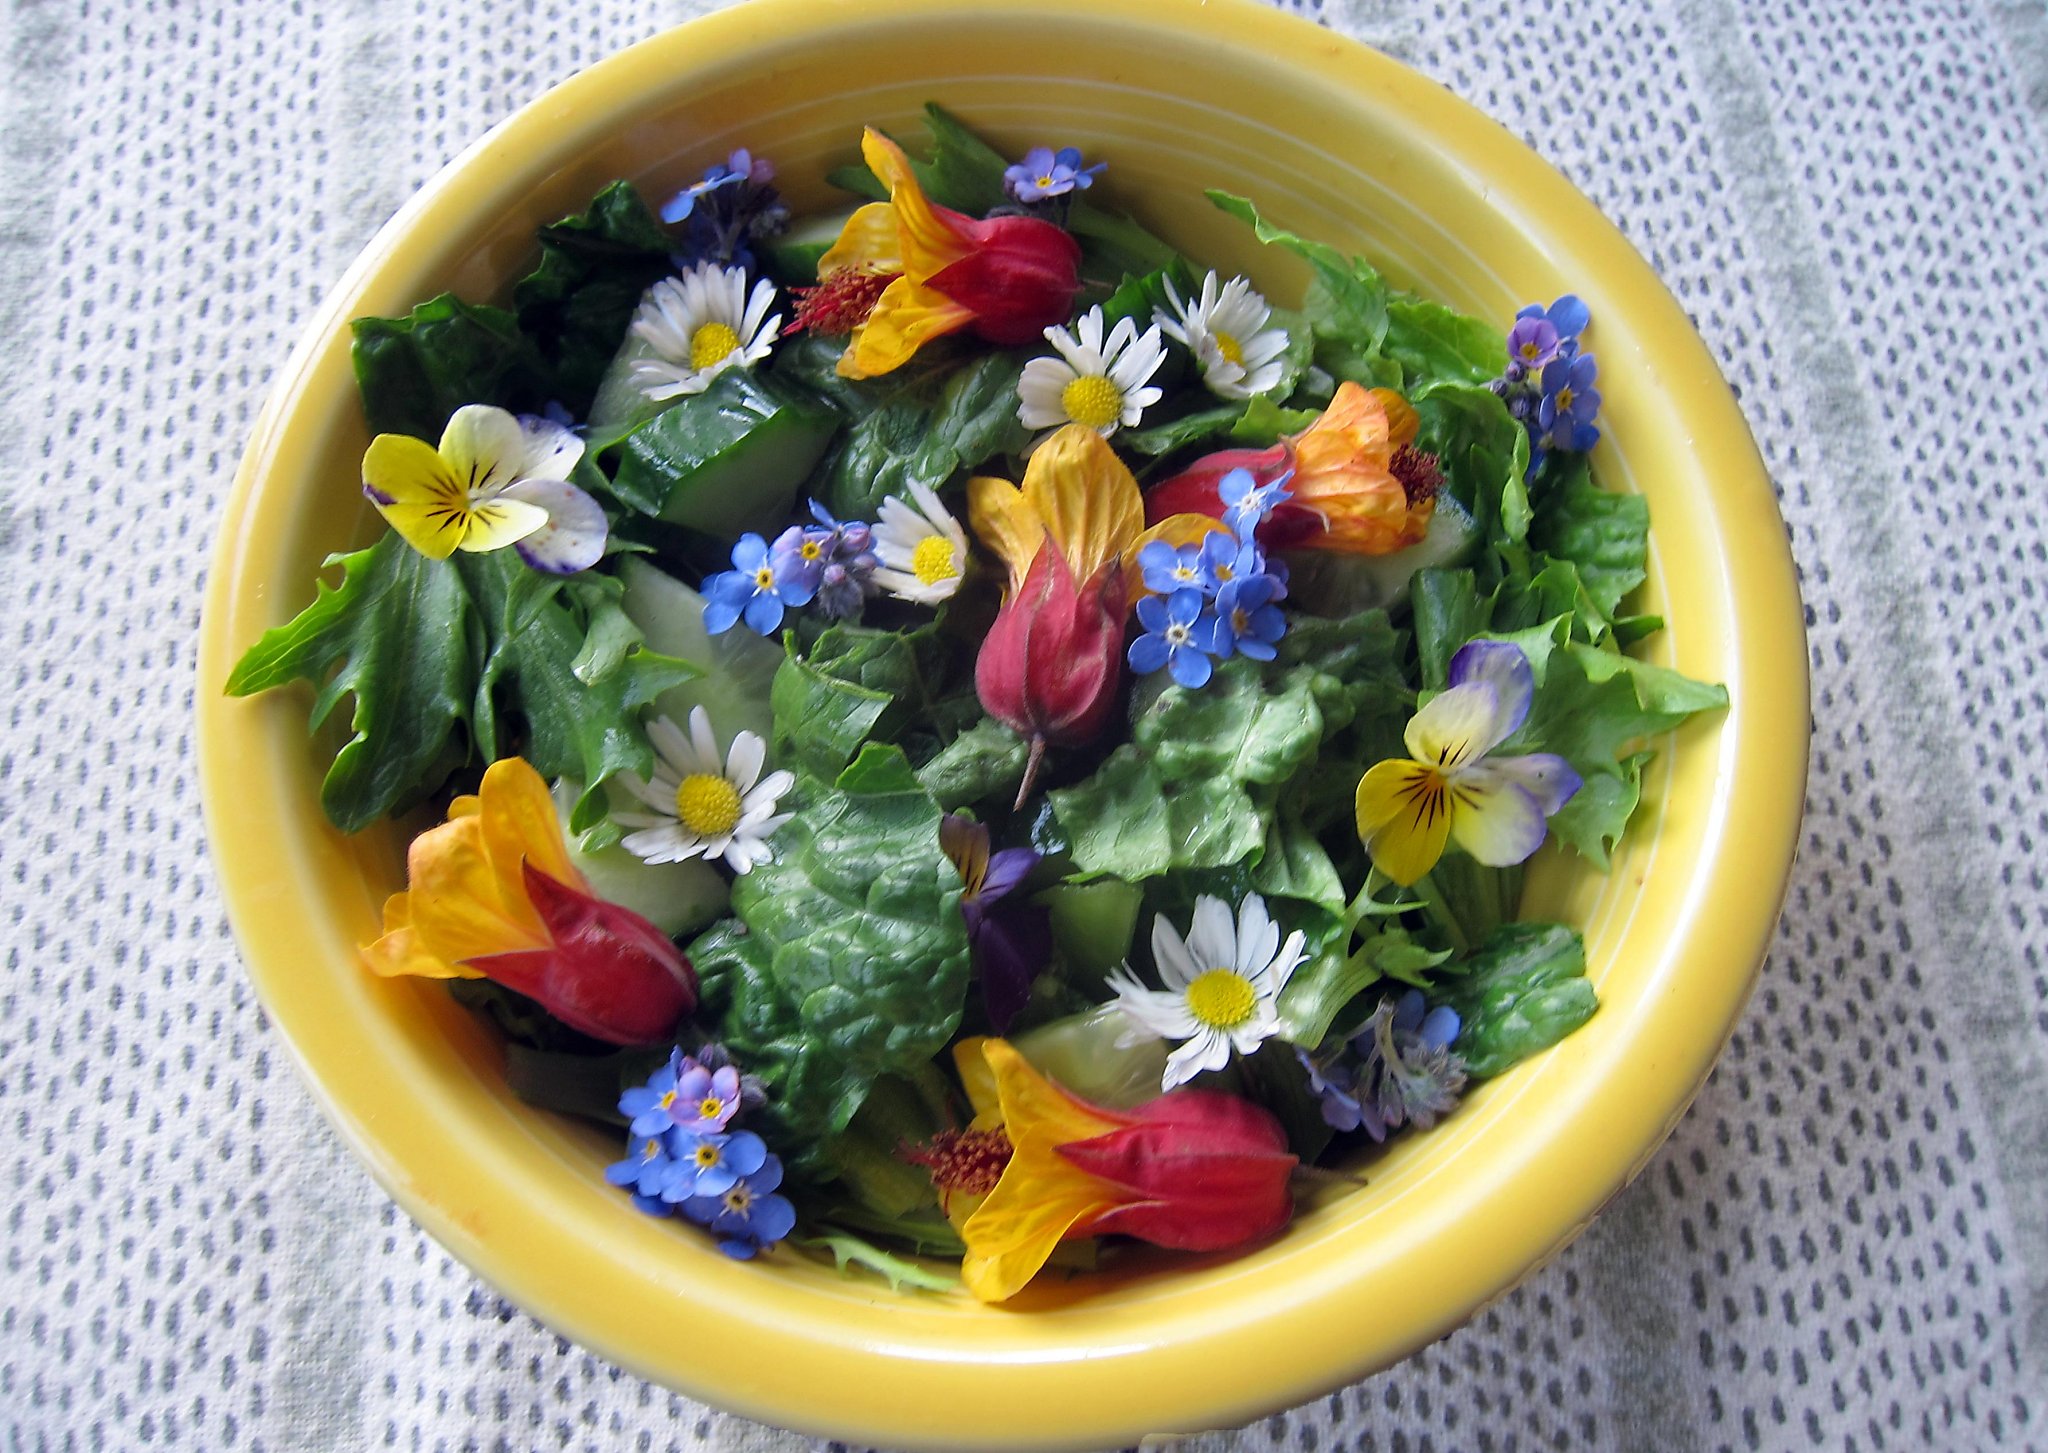 FLORAL FLAVOURS The resurgence of edible flowers